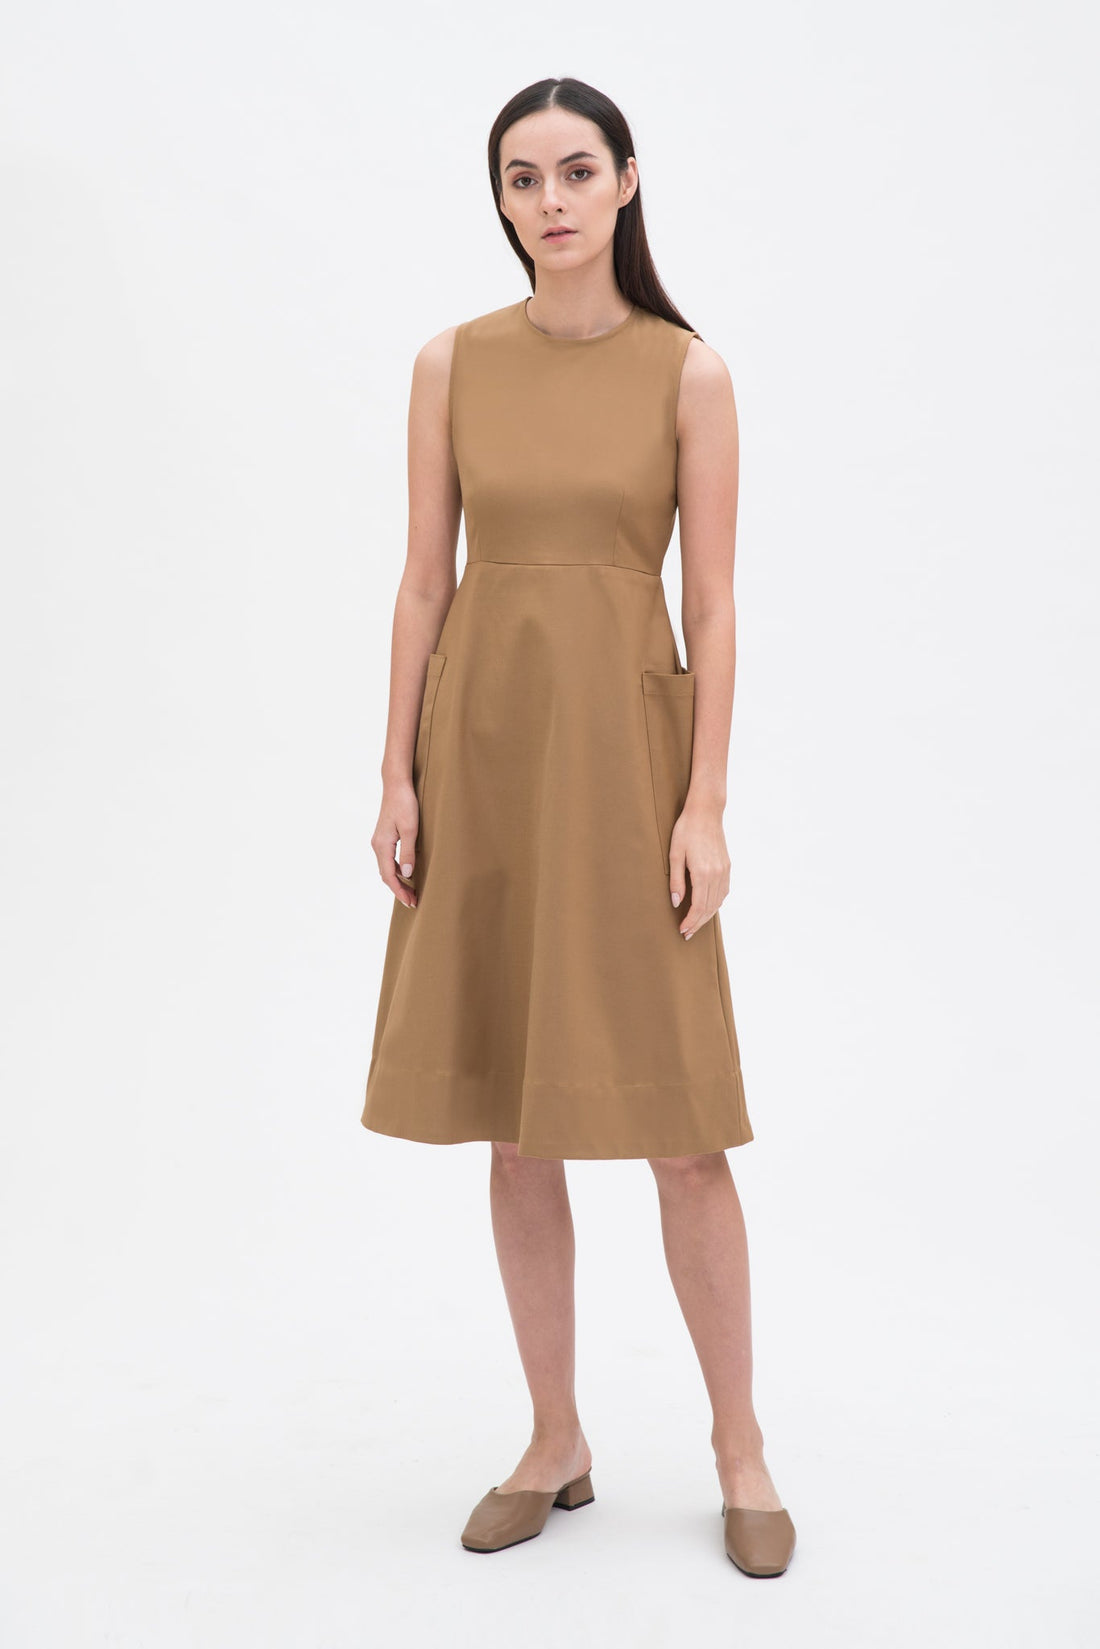 A woman with long dark hair is wearing a knee length camel dress with pockets. She is wearing camel leather shoes.